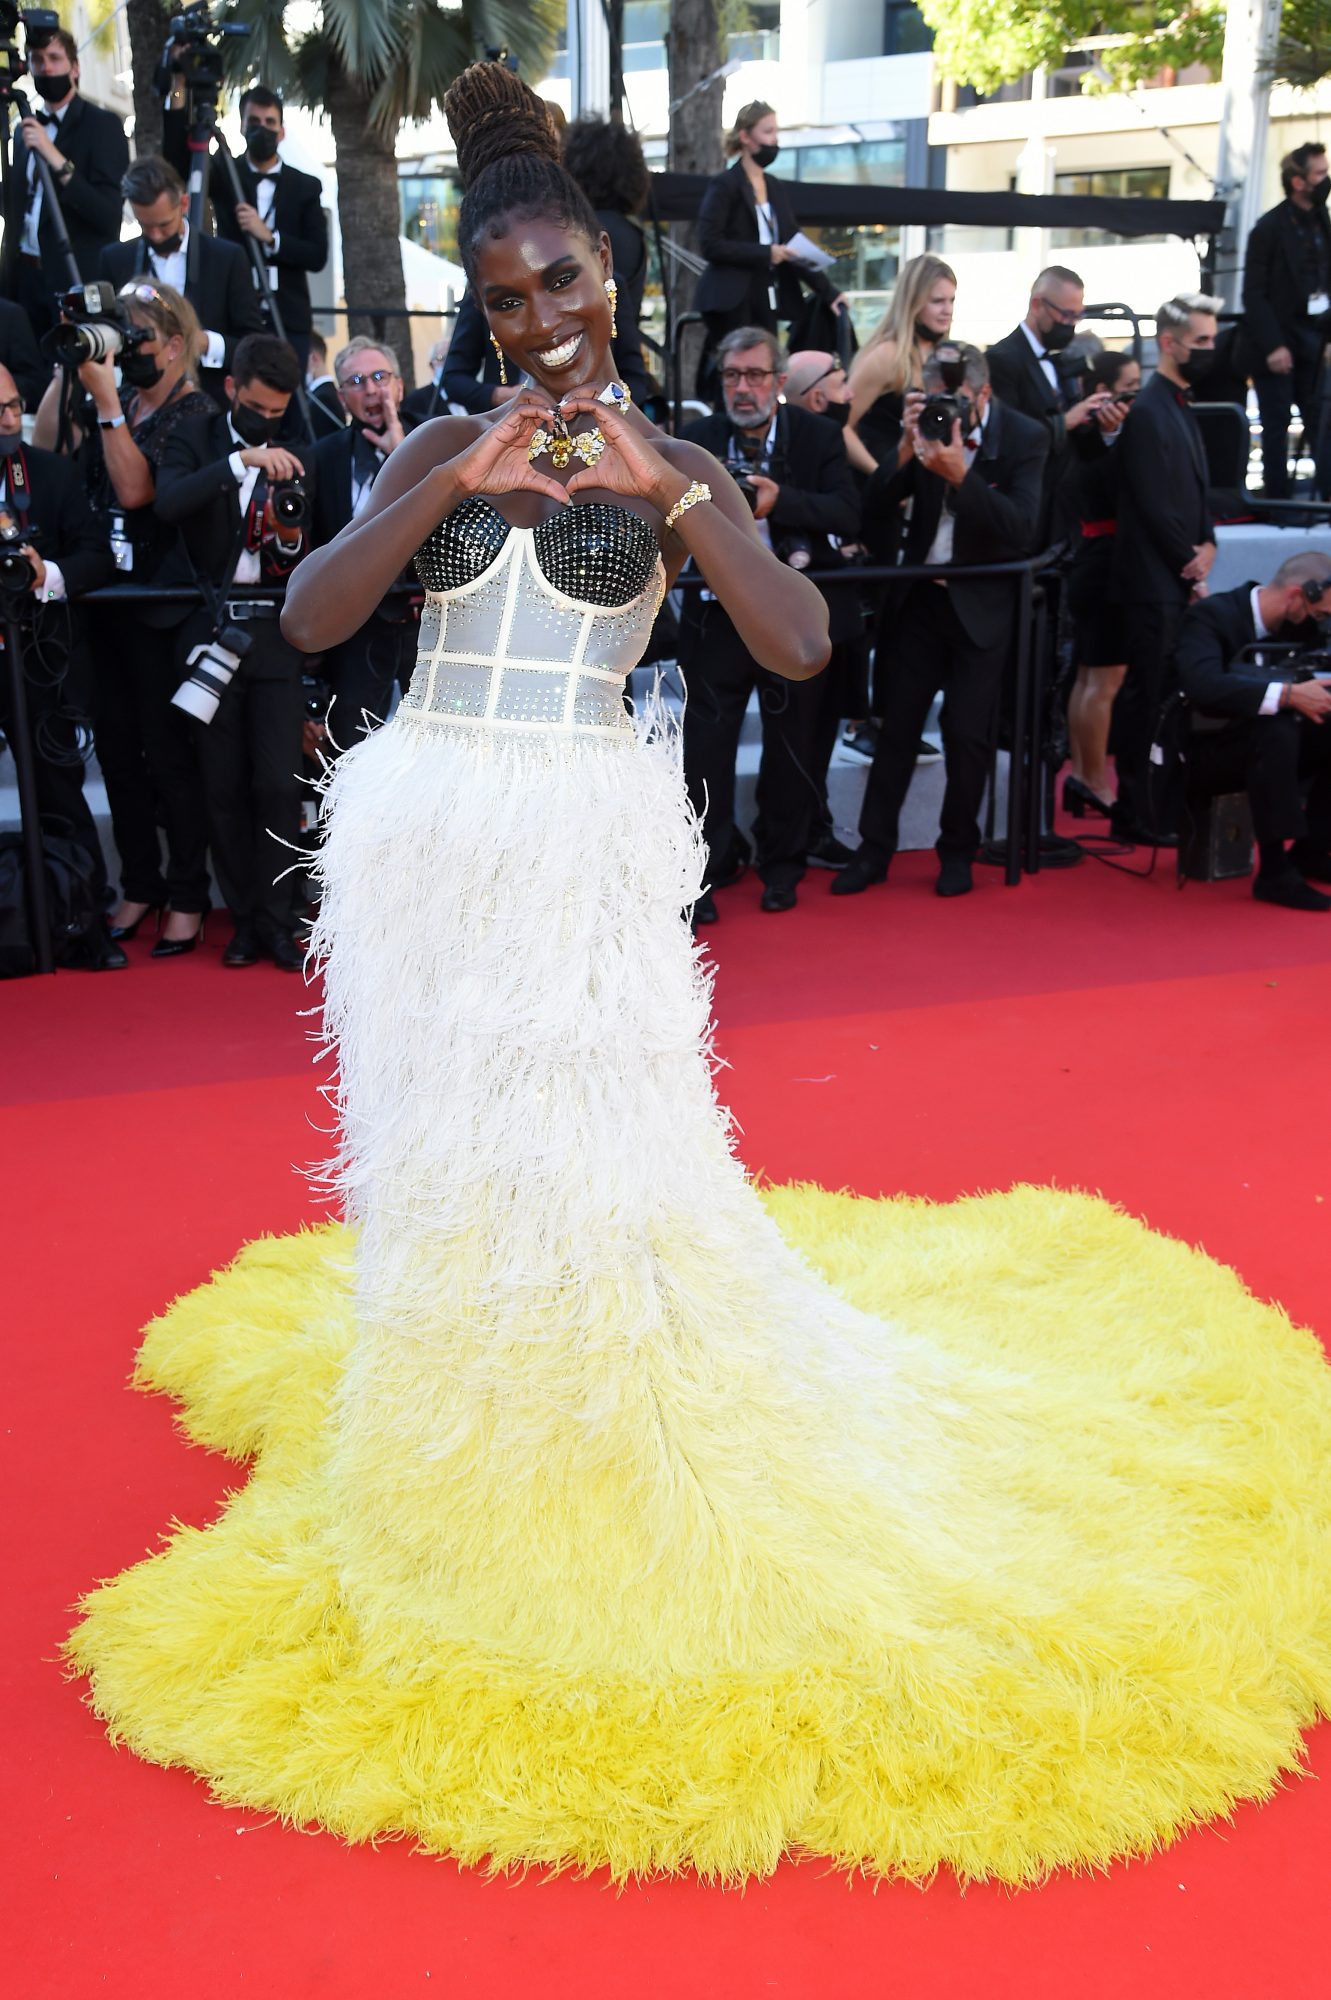 These Are the Best Dressed Stars at Cannes This Year